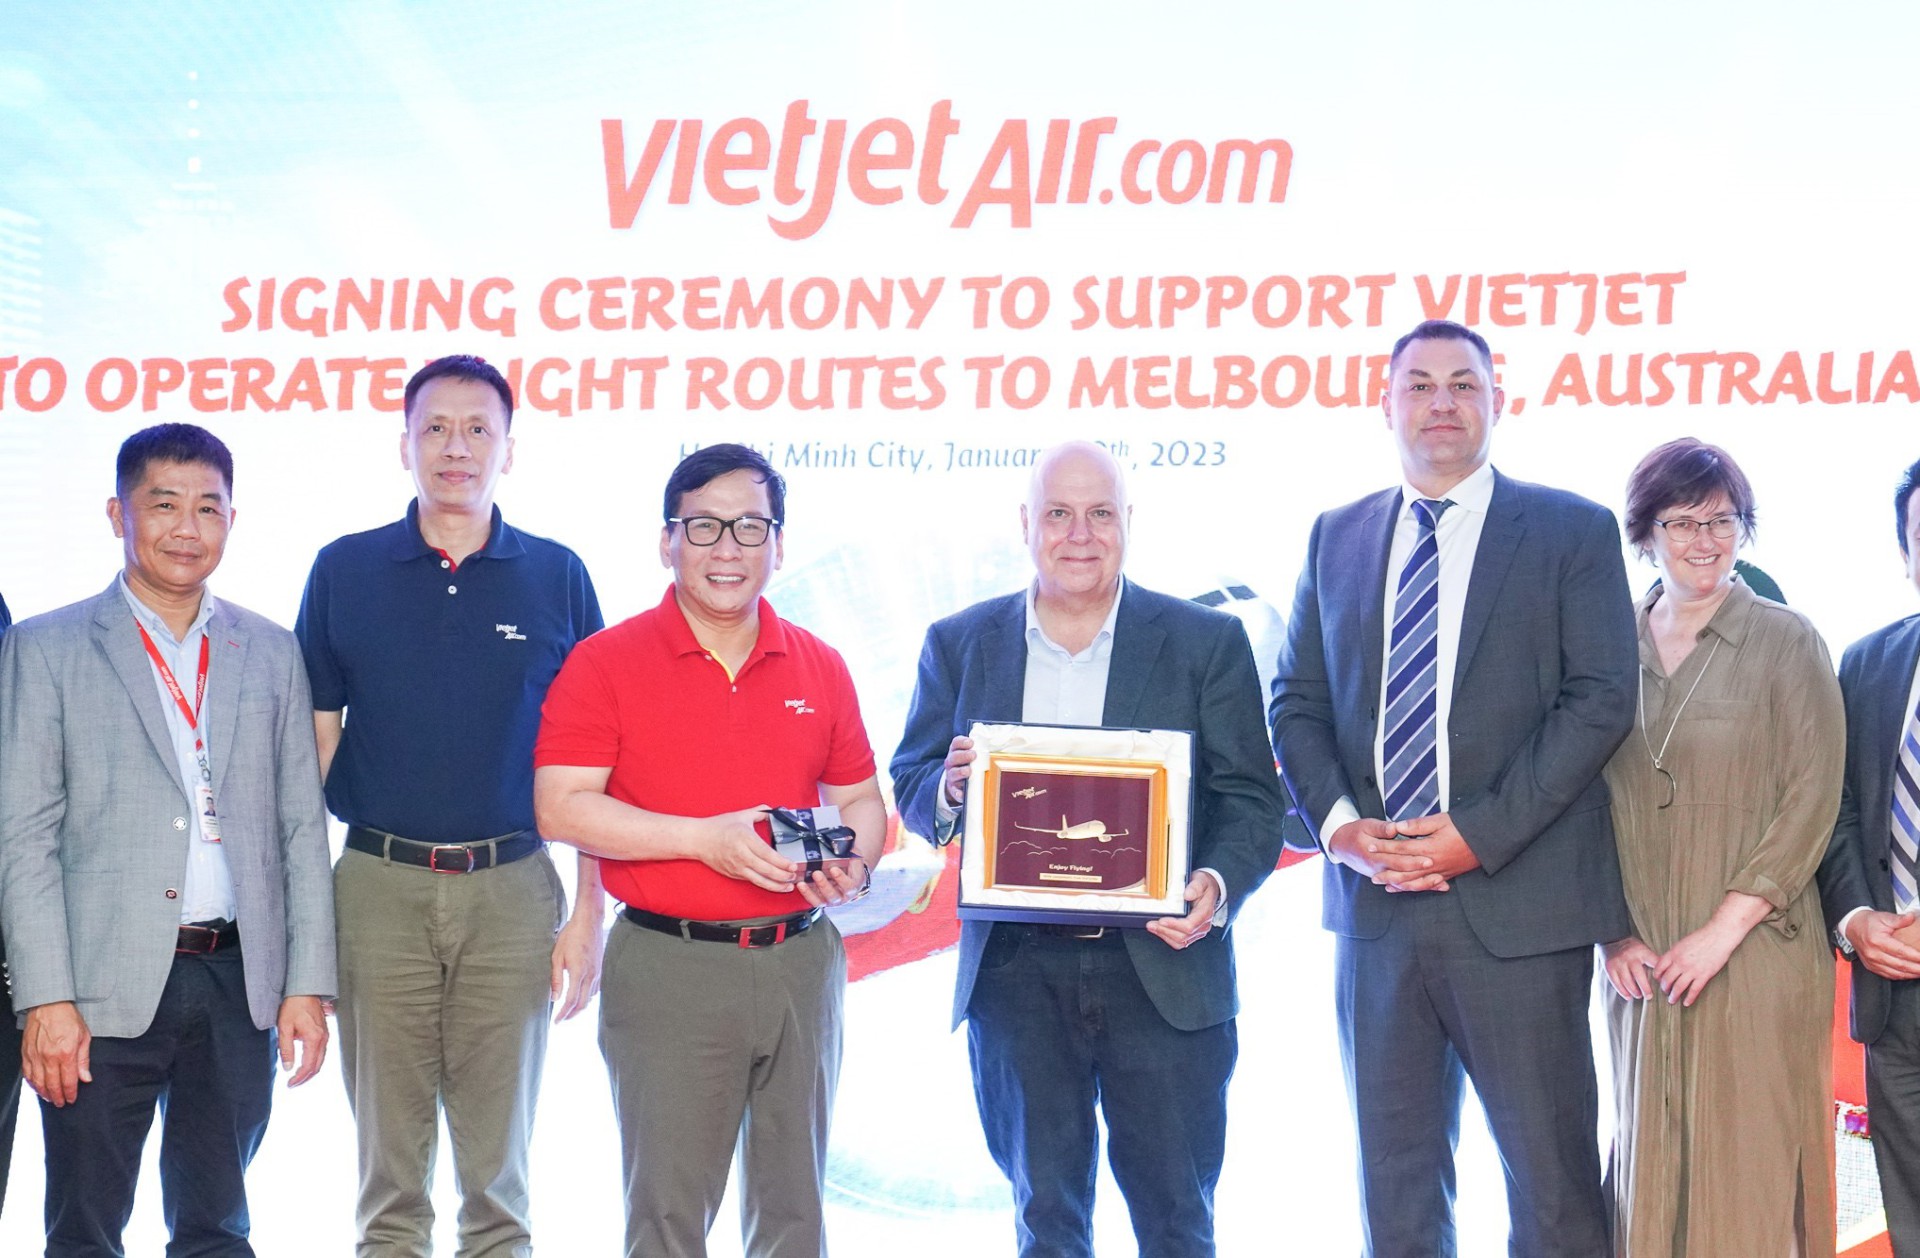 Vietjet Leader and Minister of Victoria, Australia jointly announce to operate direct flights from HCMC to Melbourne (Australia) since March 31st, 2023